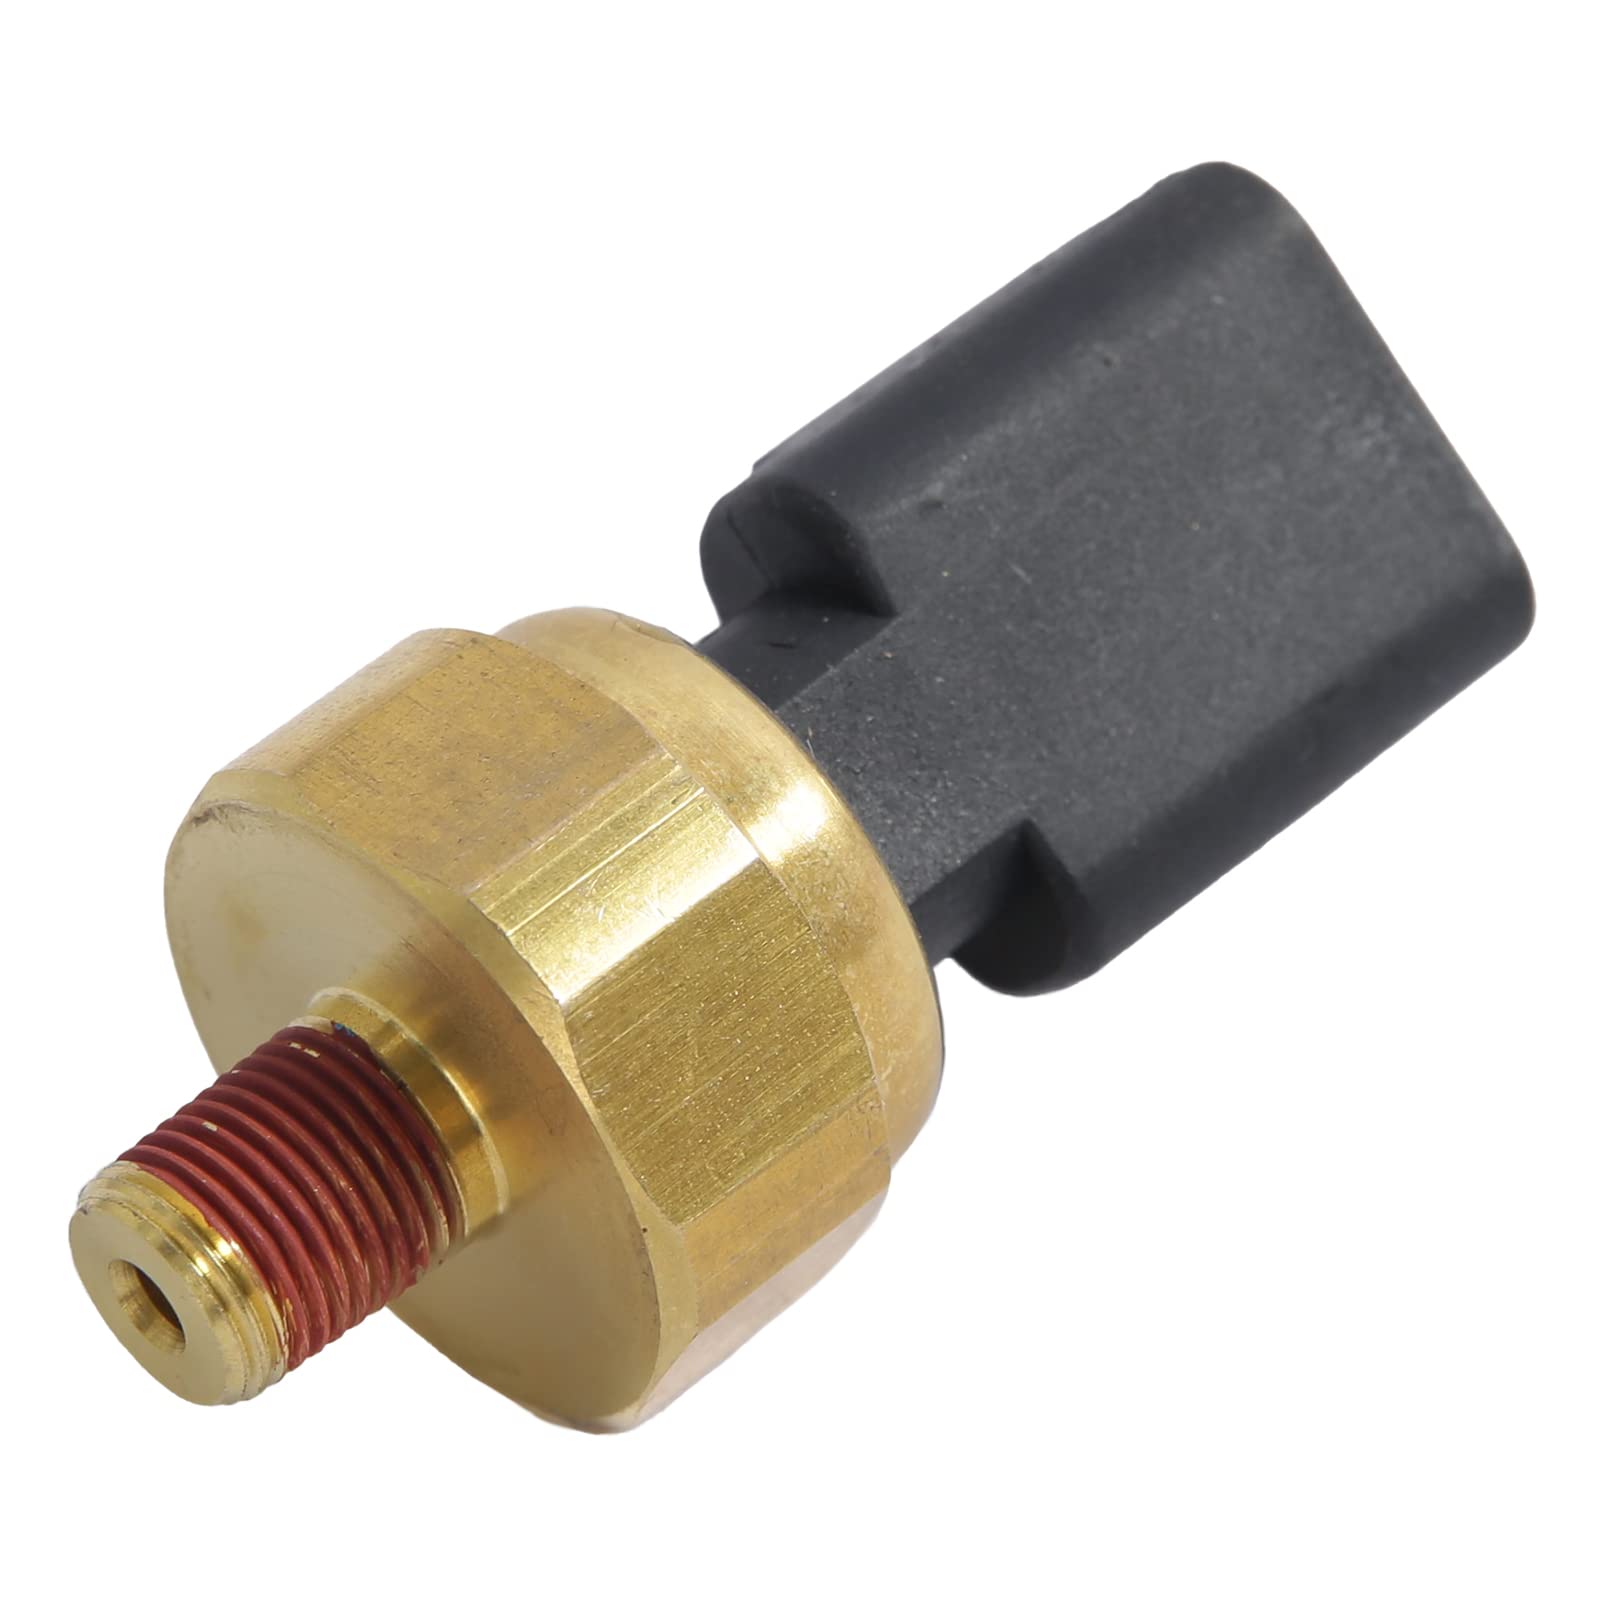 Engine Oil Pressure Sensor Switch - Replaces 5149062AA, 05149062AA, 56028807AB, 56028807AA - Compatible with Chrysler, Dodge, Jeep, Ram - 200, 300, Avenger, Challenger, Durango, 1500, Grand Cherokee  - Like New